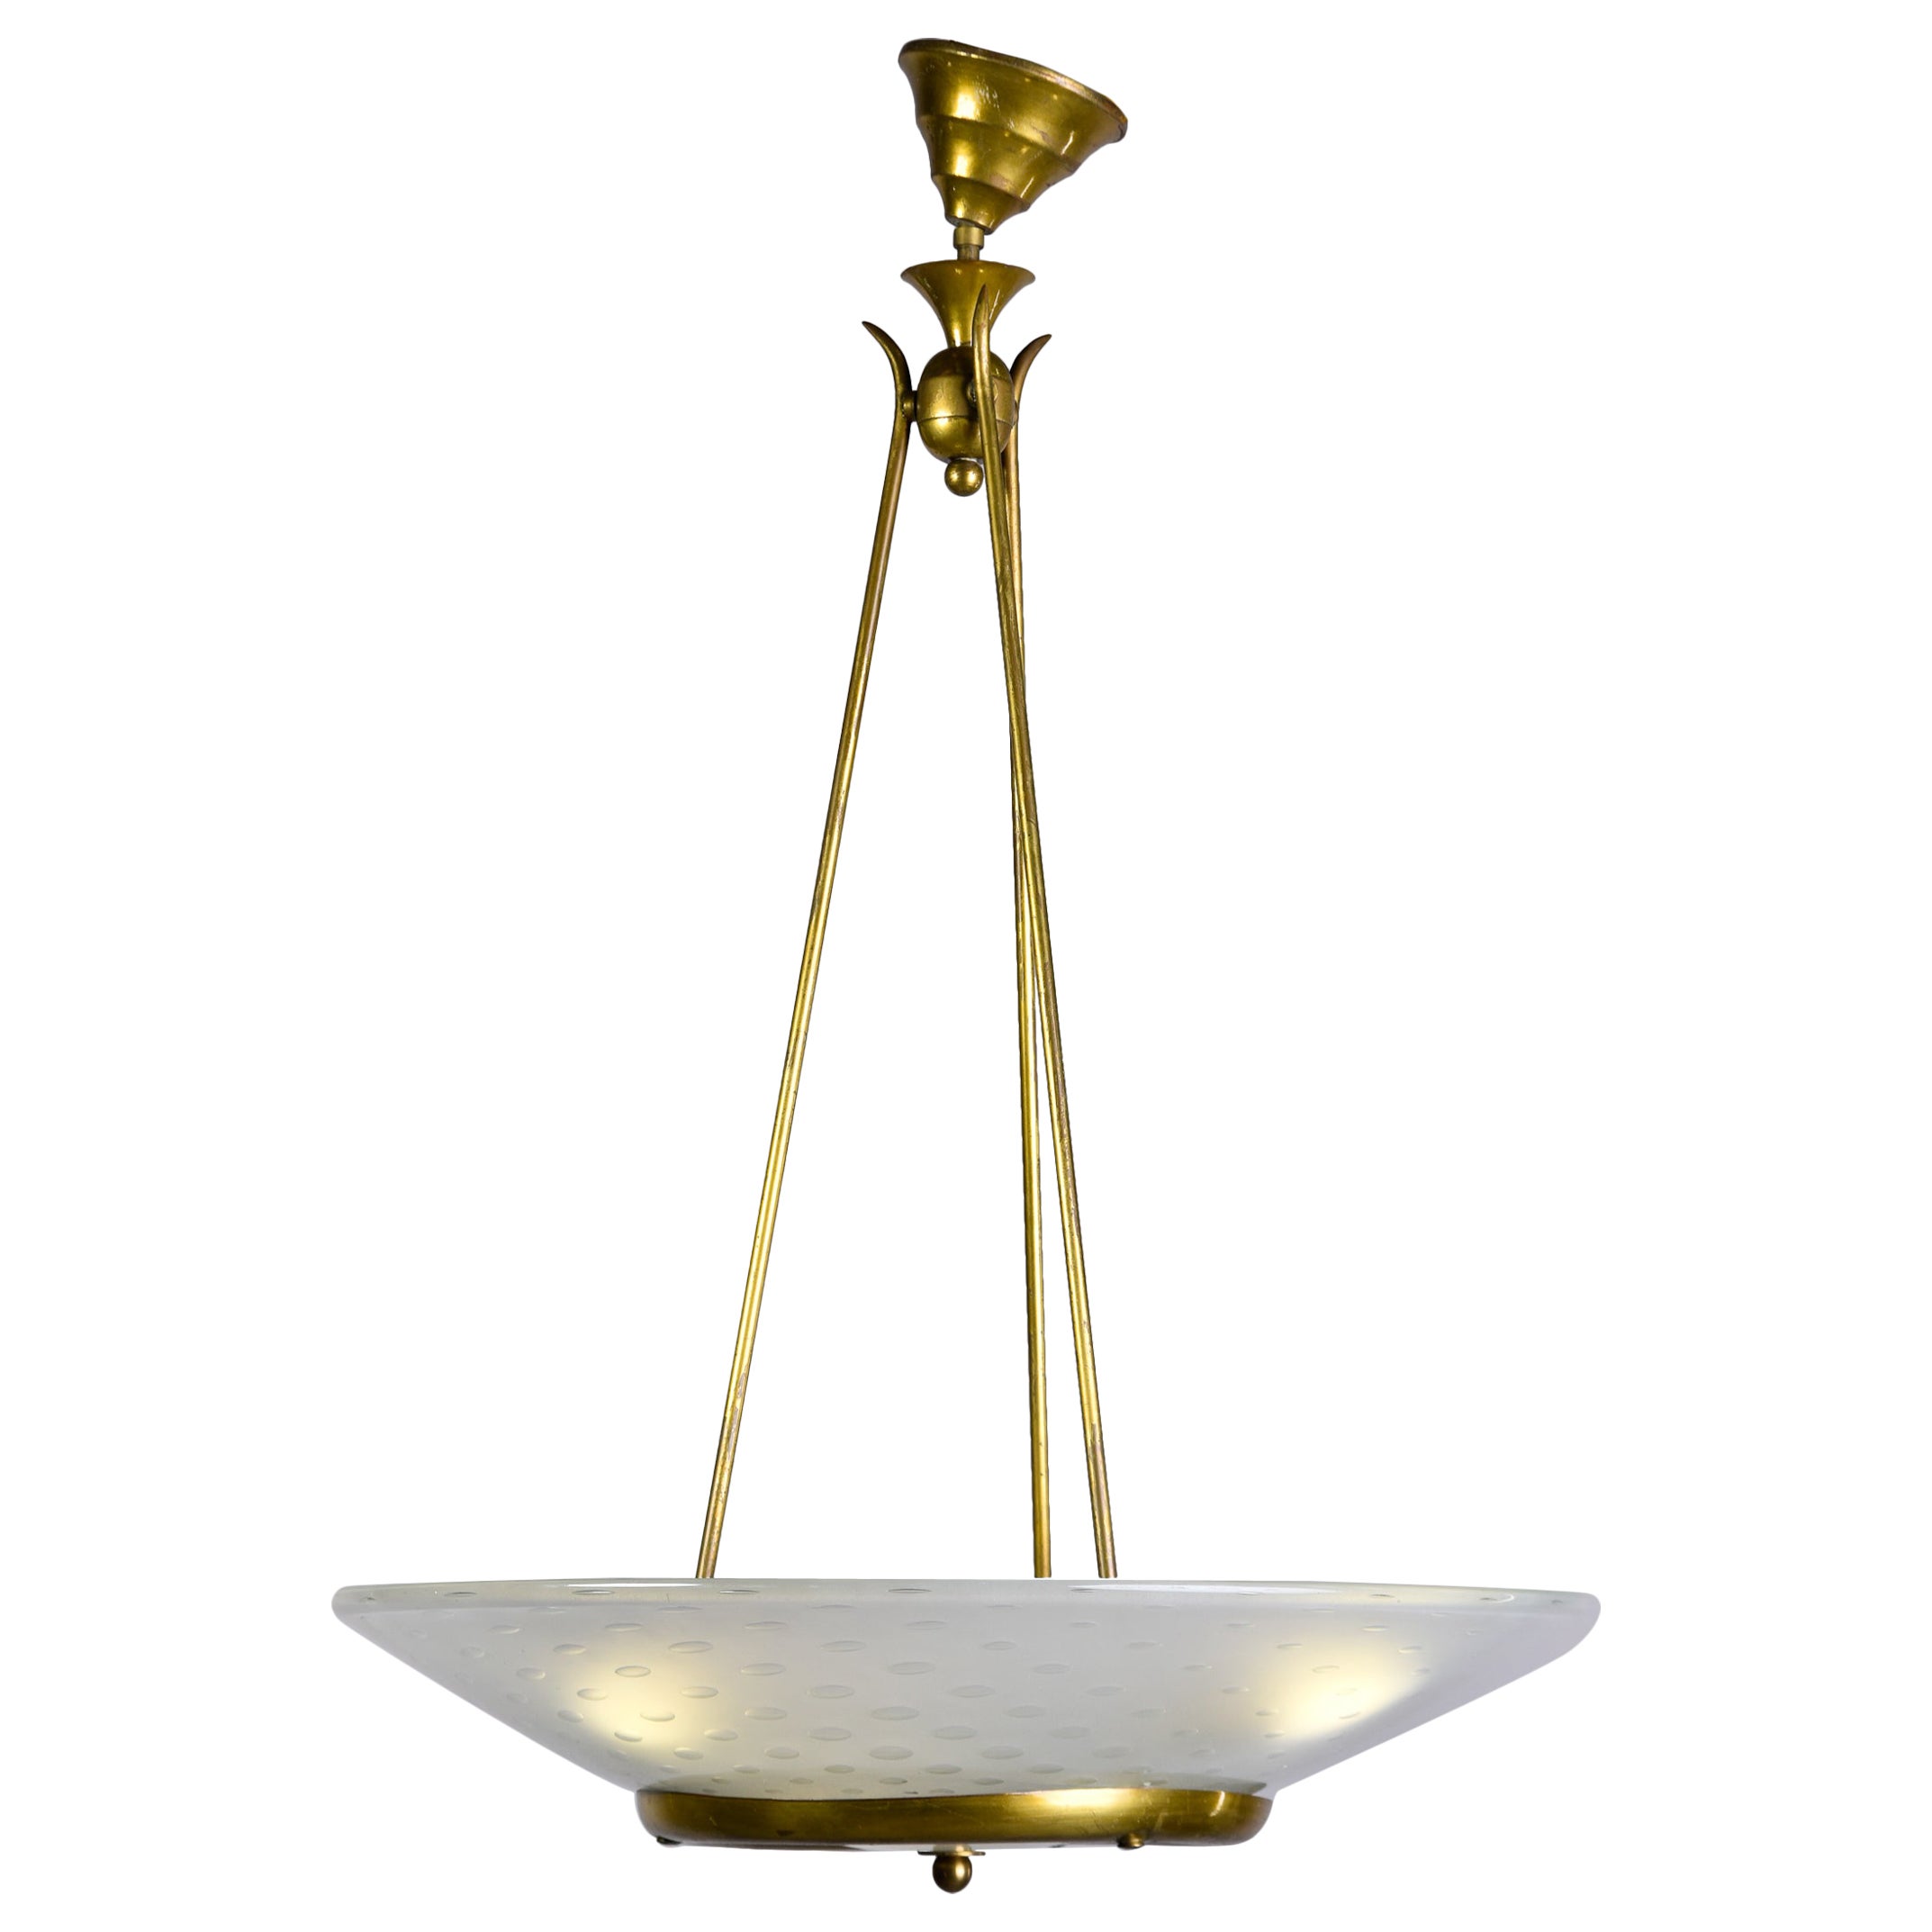 New Three Light Vecchio Chandelier in Brass with Murano Bubble Glass Shade